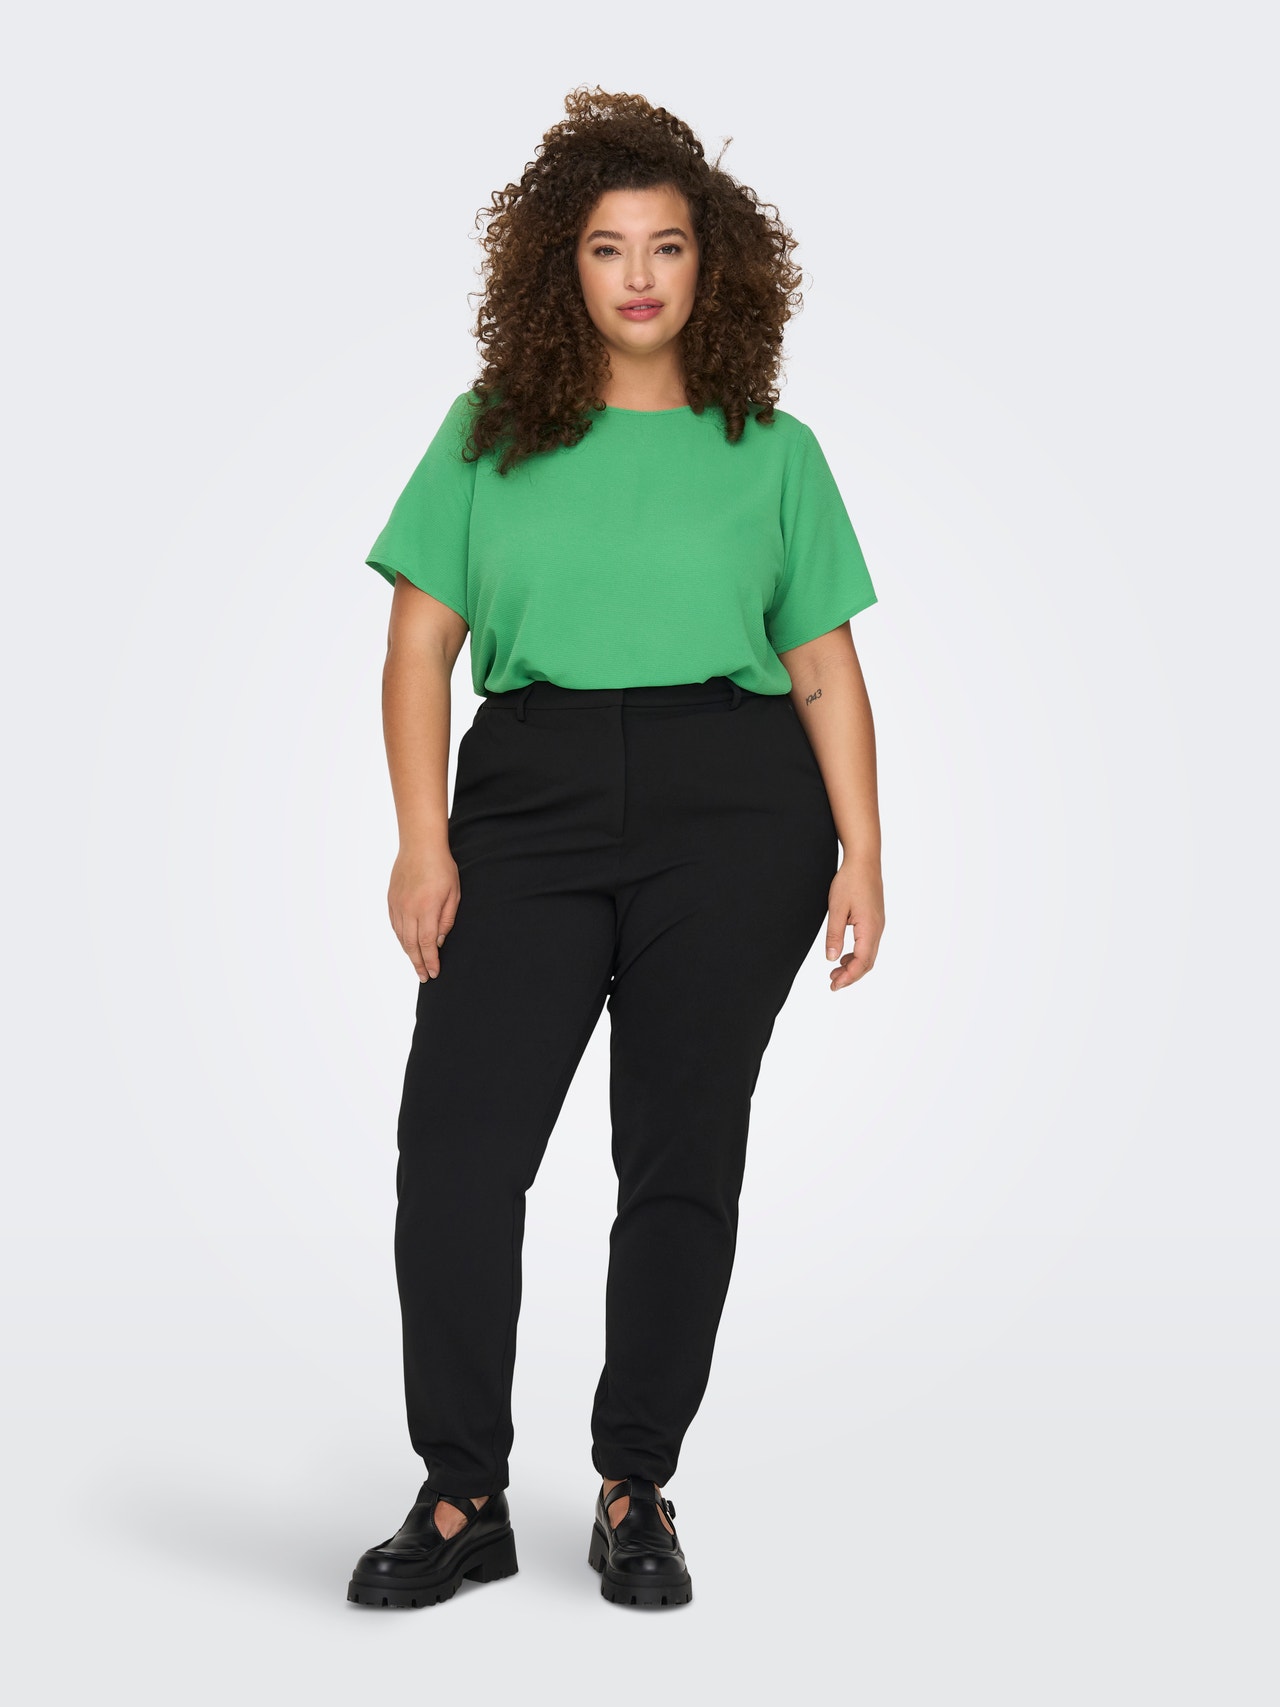 ONLY Curvy short sleeve Top -Kelly Green - 15218353